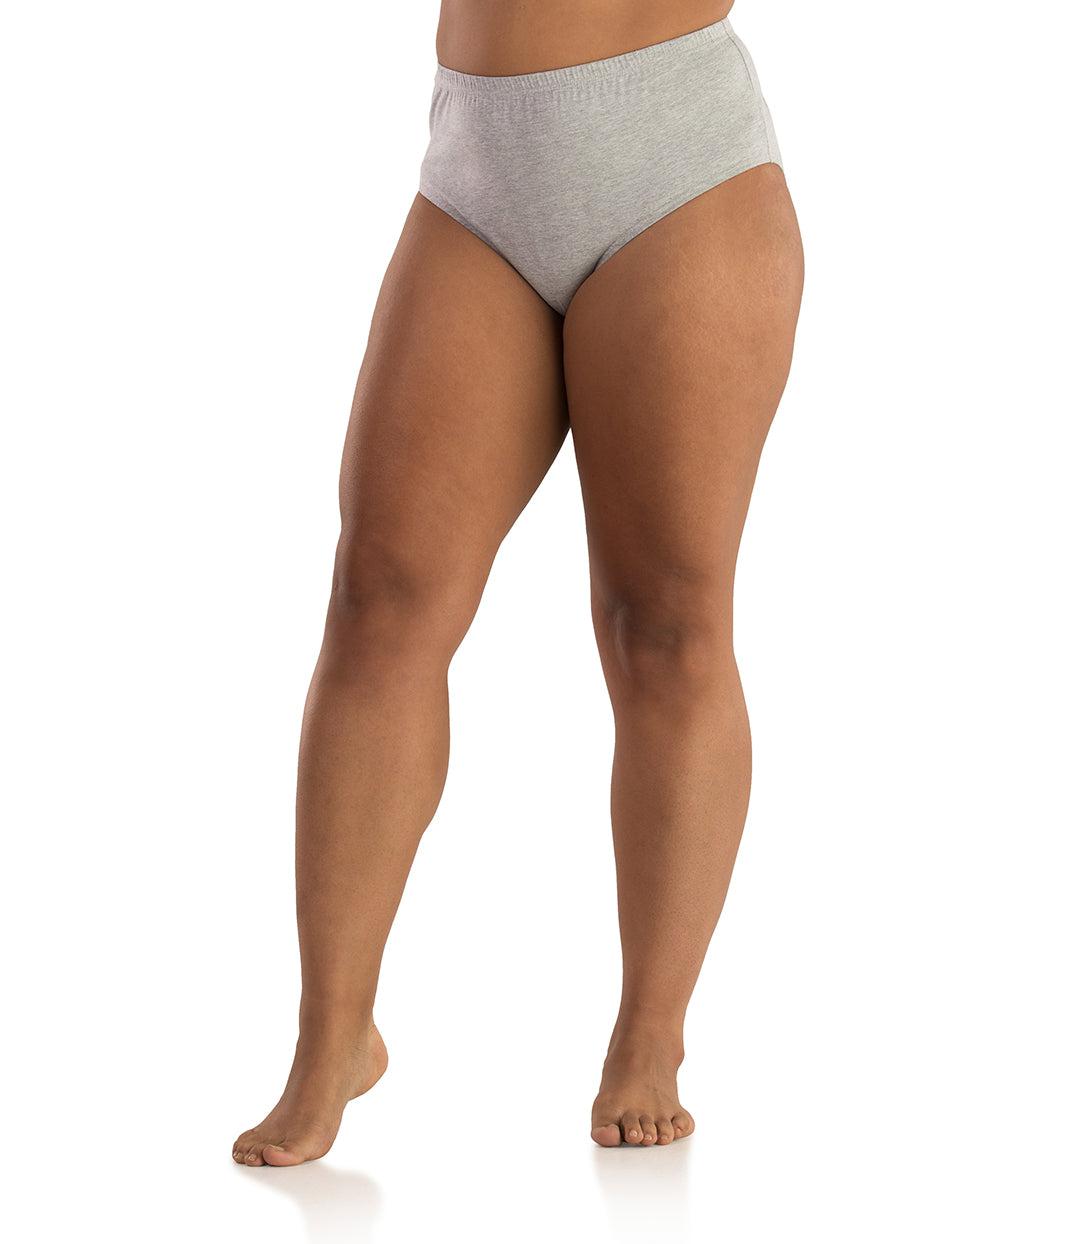  UNSERE Dresses Cotton Underwear for Women High Waist Stretchy  Full Briefs Leakproof Super Elastic Comfy Panties Petite to Plus Size(Beige, Large) : Sports & Outdoors